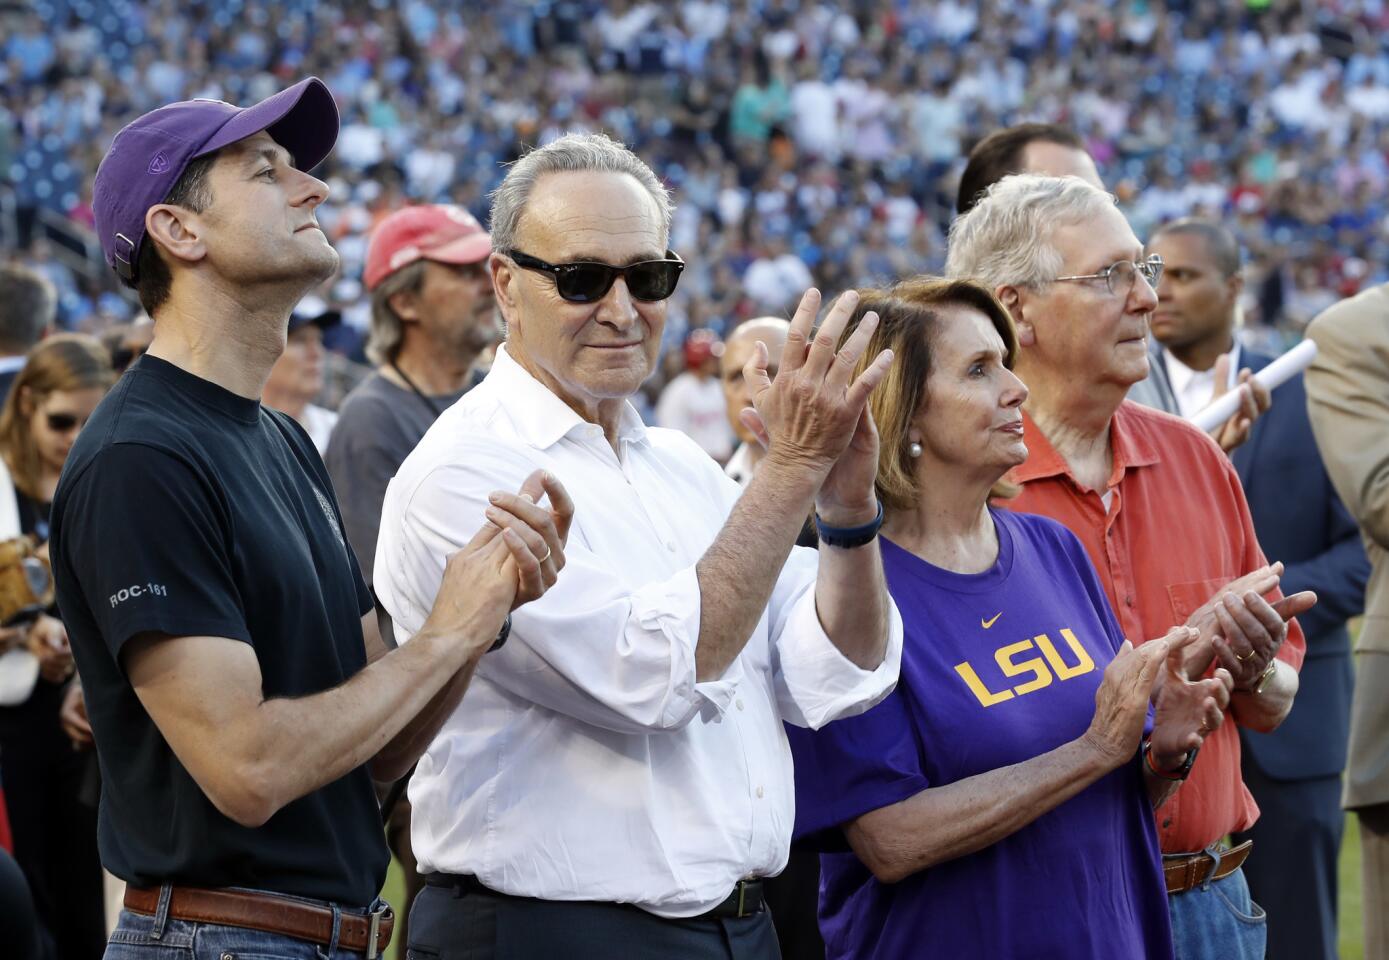 House Speaker Paul D. Ryan (R-Wis.), Senate Minority Leader Charles E. Schumer (D-N.Y.), House Minority Leader Nancy Pelosi (D-San Francisco) and Senate Majority Leader Mitch McConnell (R-Ky.), from left, applaud a message on the video board from President Trump before the game begins.